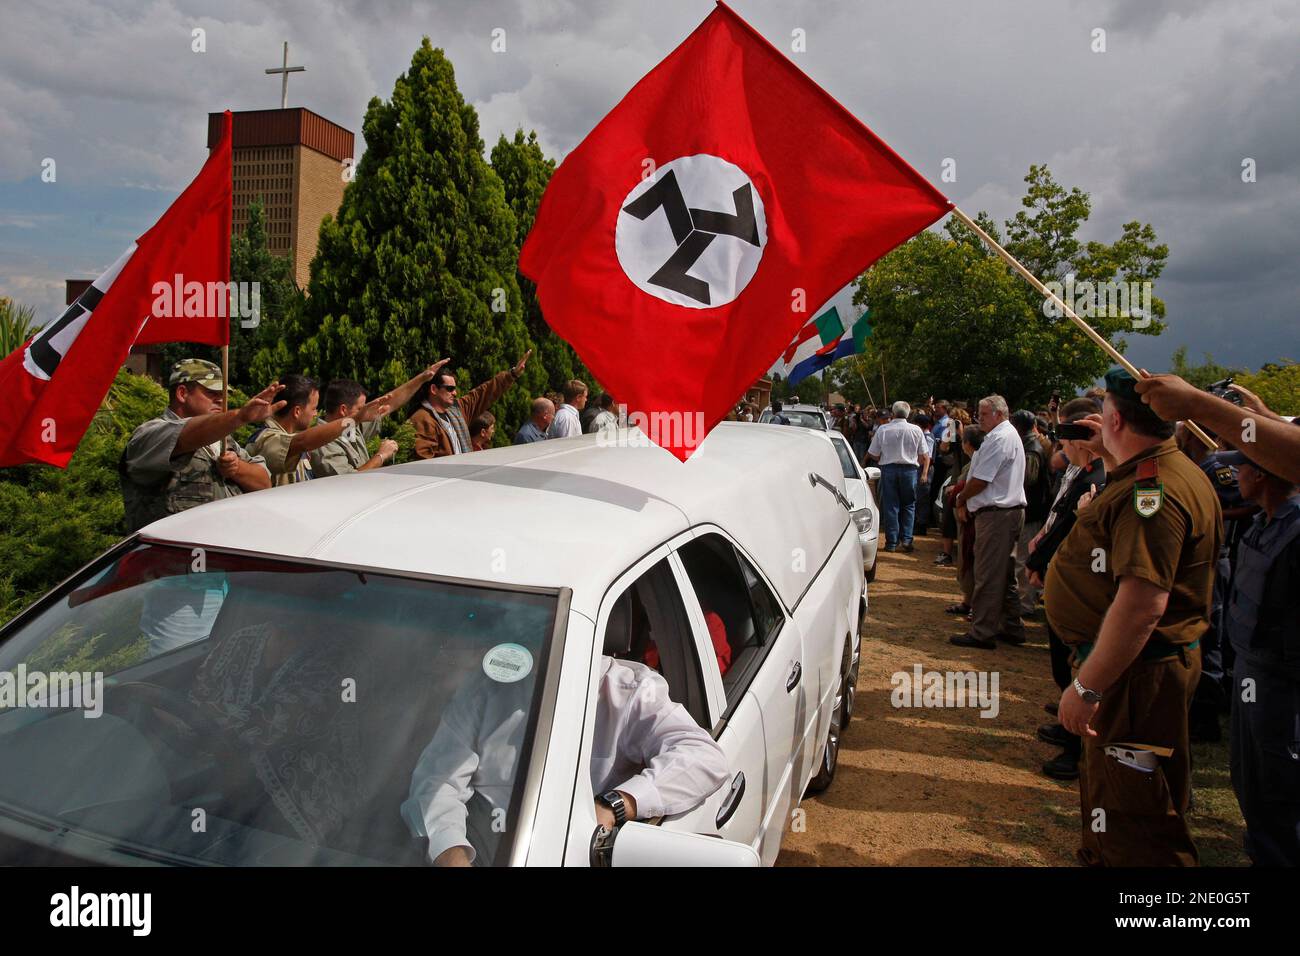 South African white supremacist leader killed